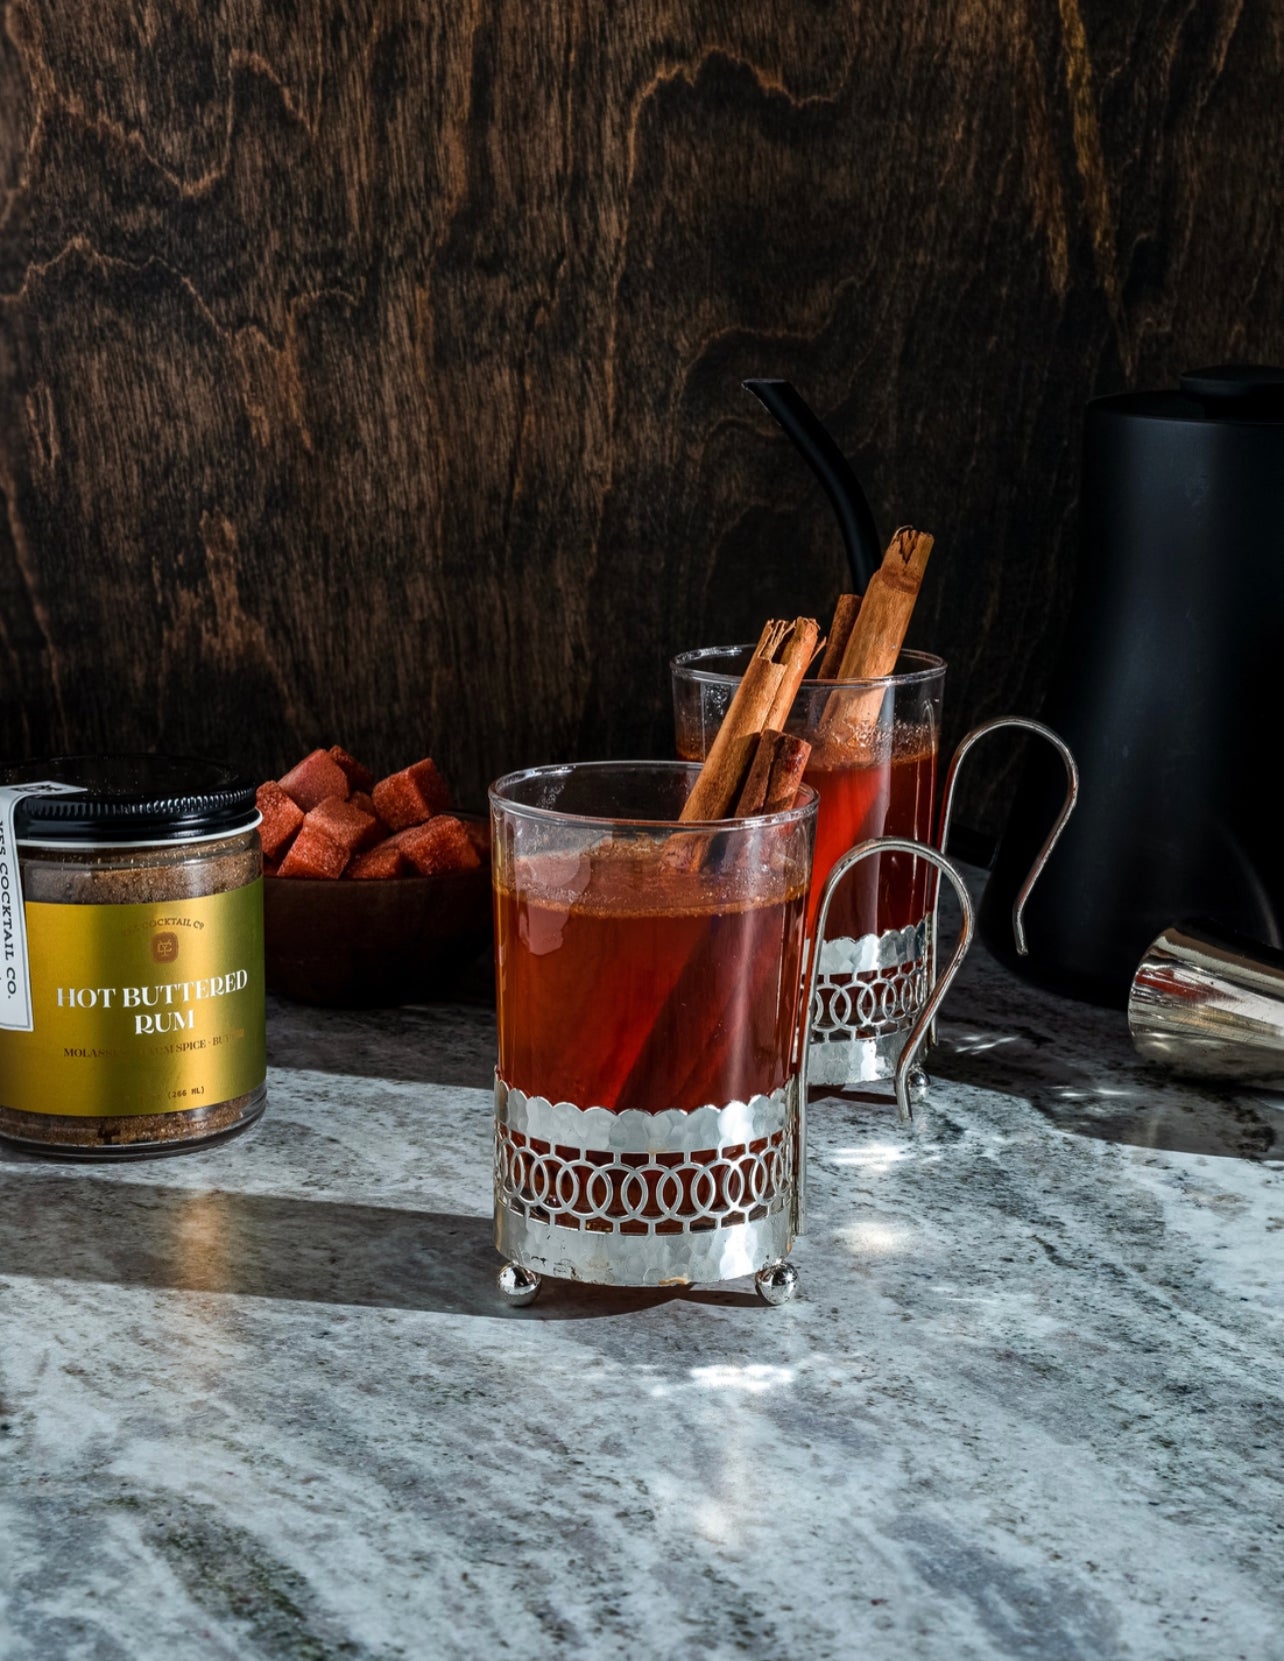 hot buttered rum mix displayed in turkish coffee cups and garnished with cinnamon sticks